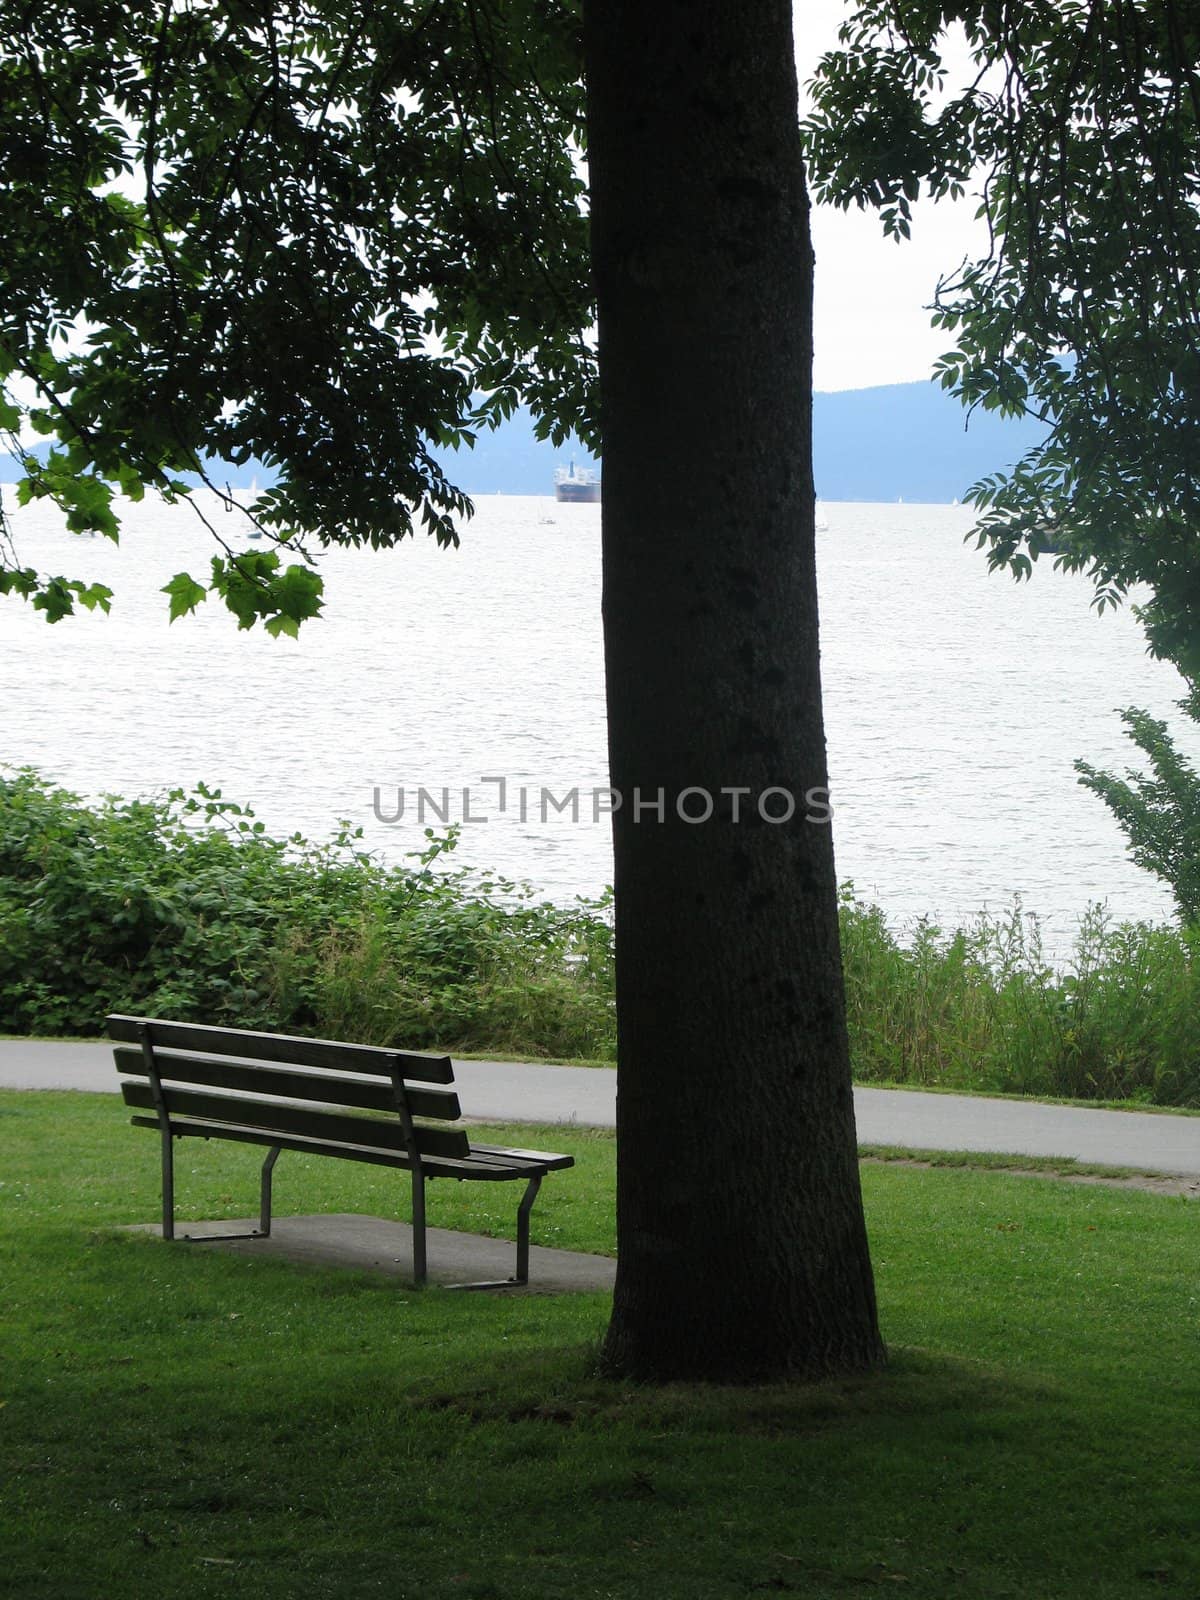 bench in a park by the ocean